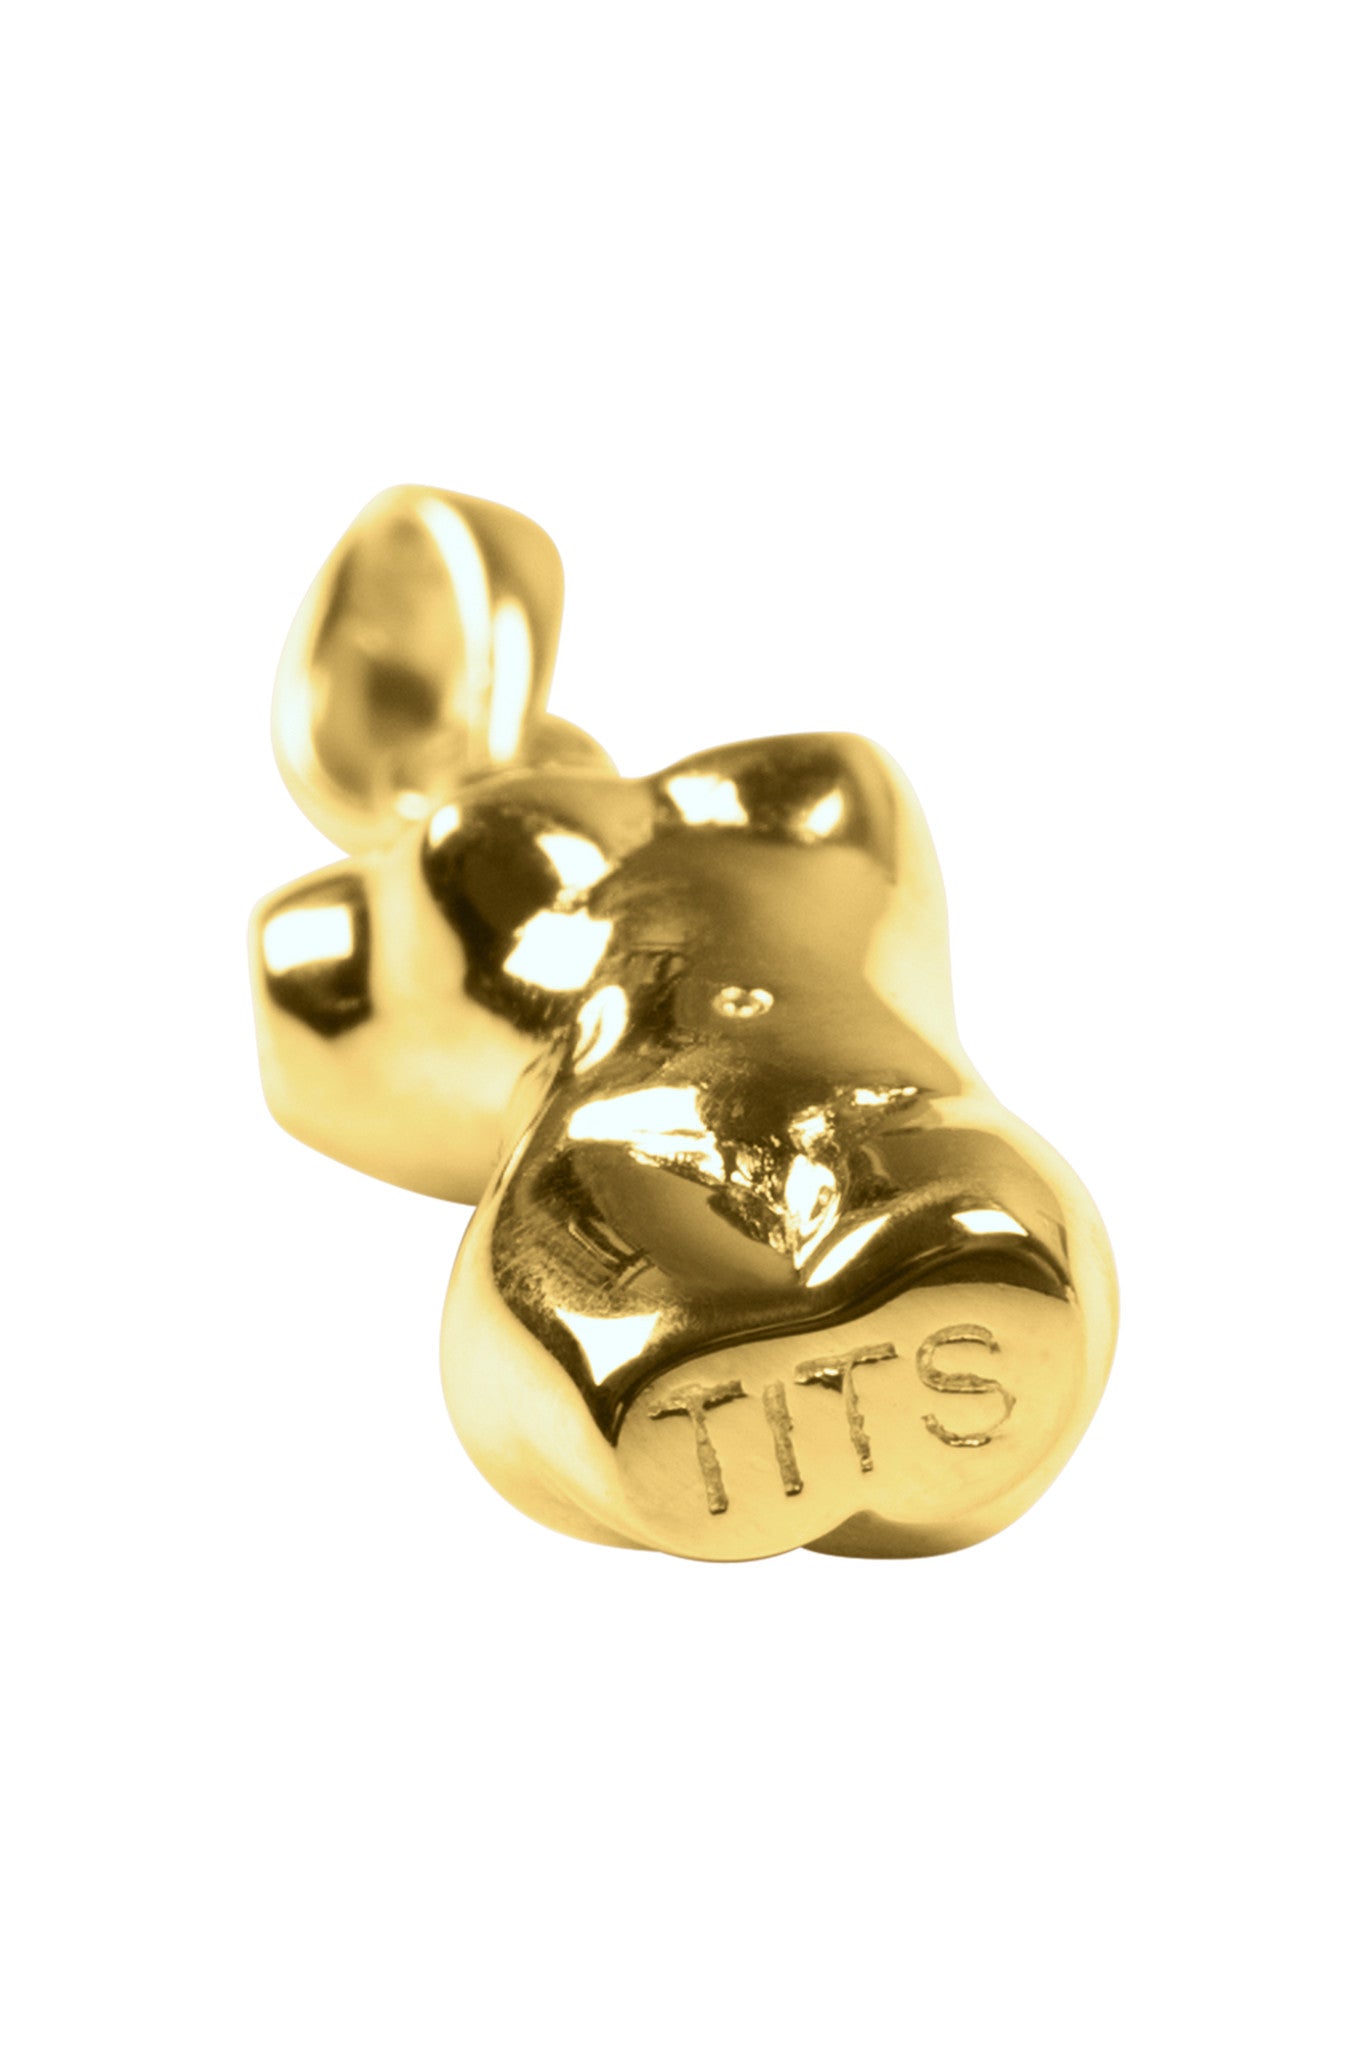 BODY PENDANT Gold by T.I.T.S.